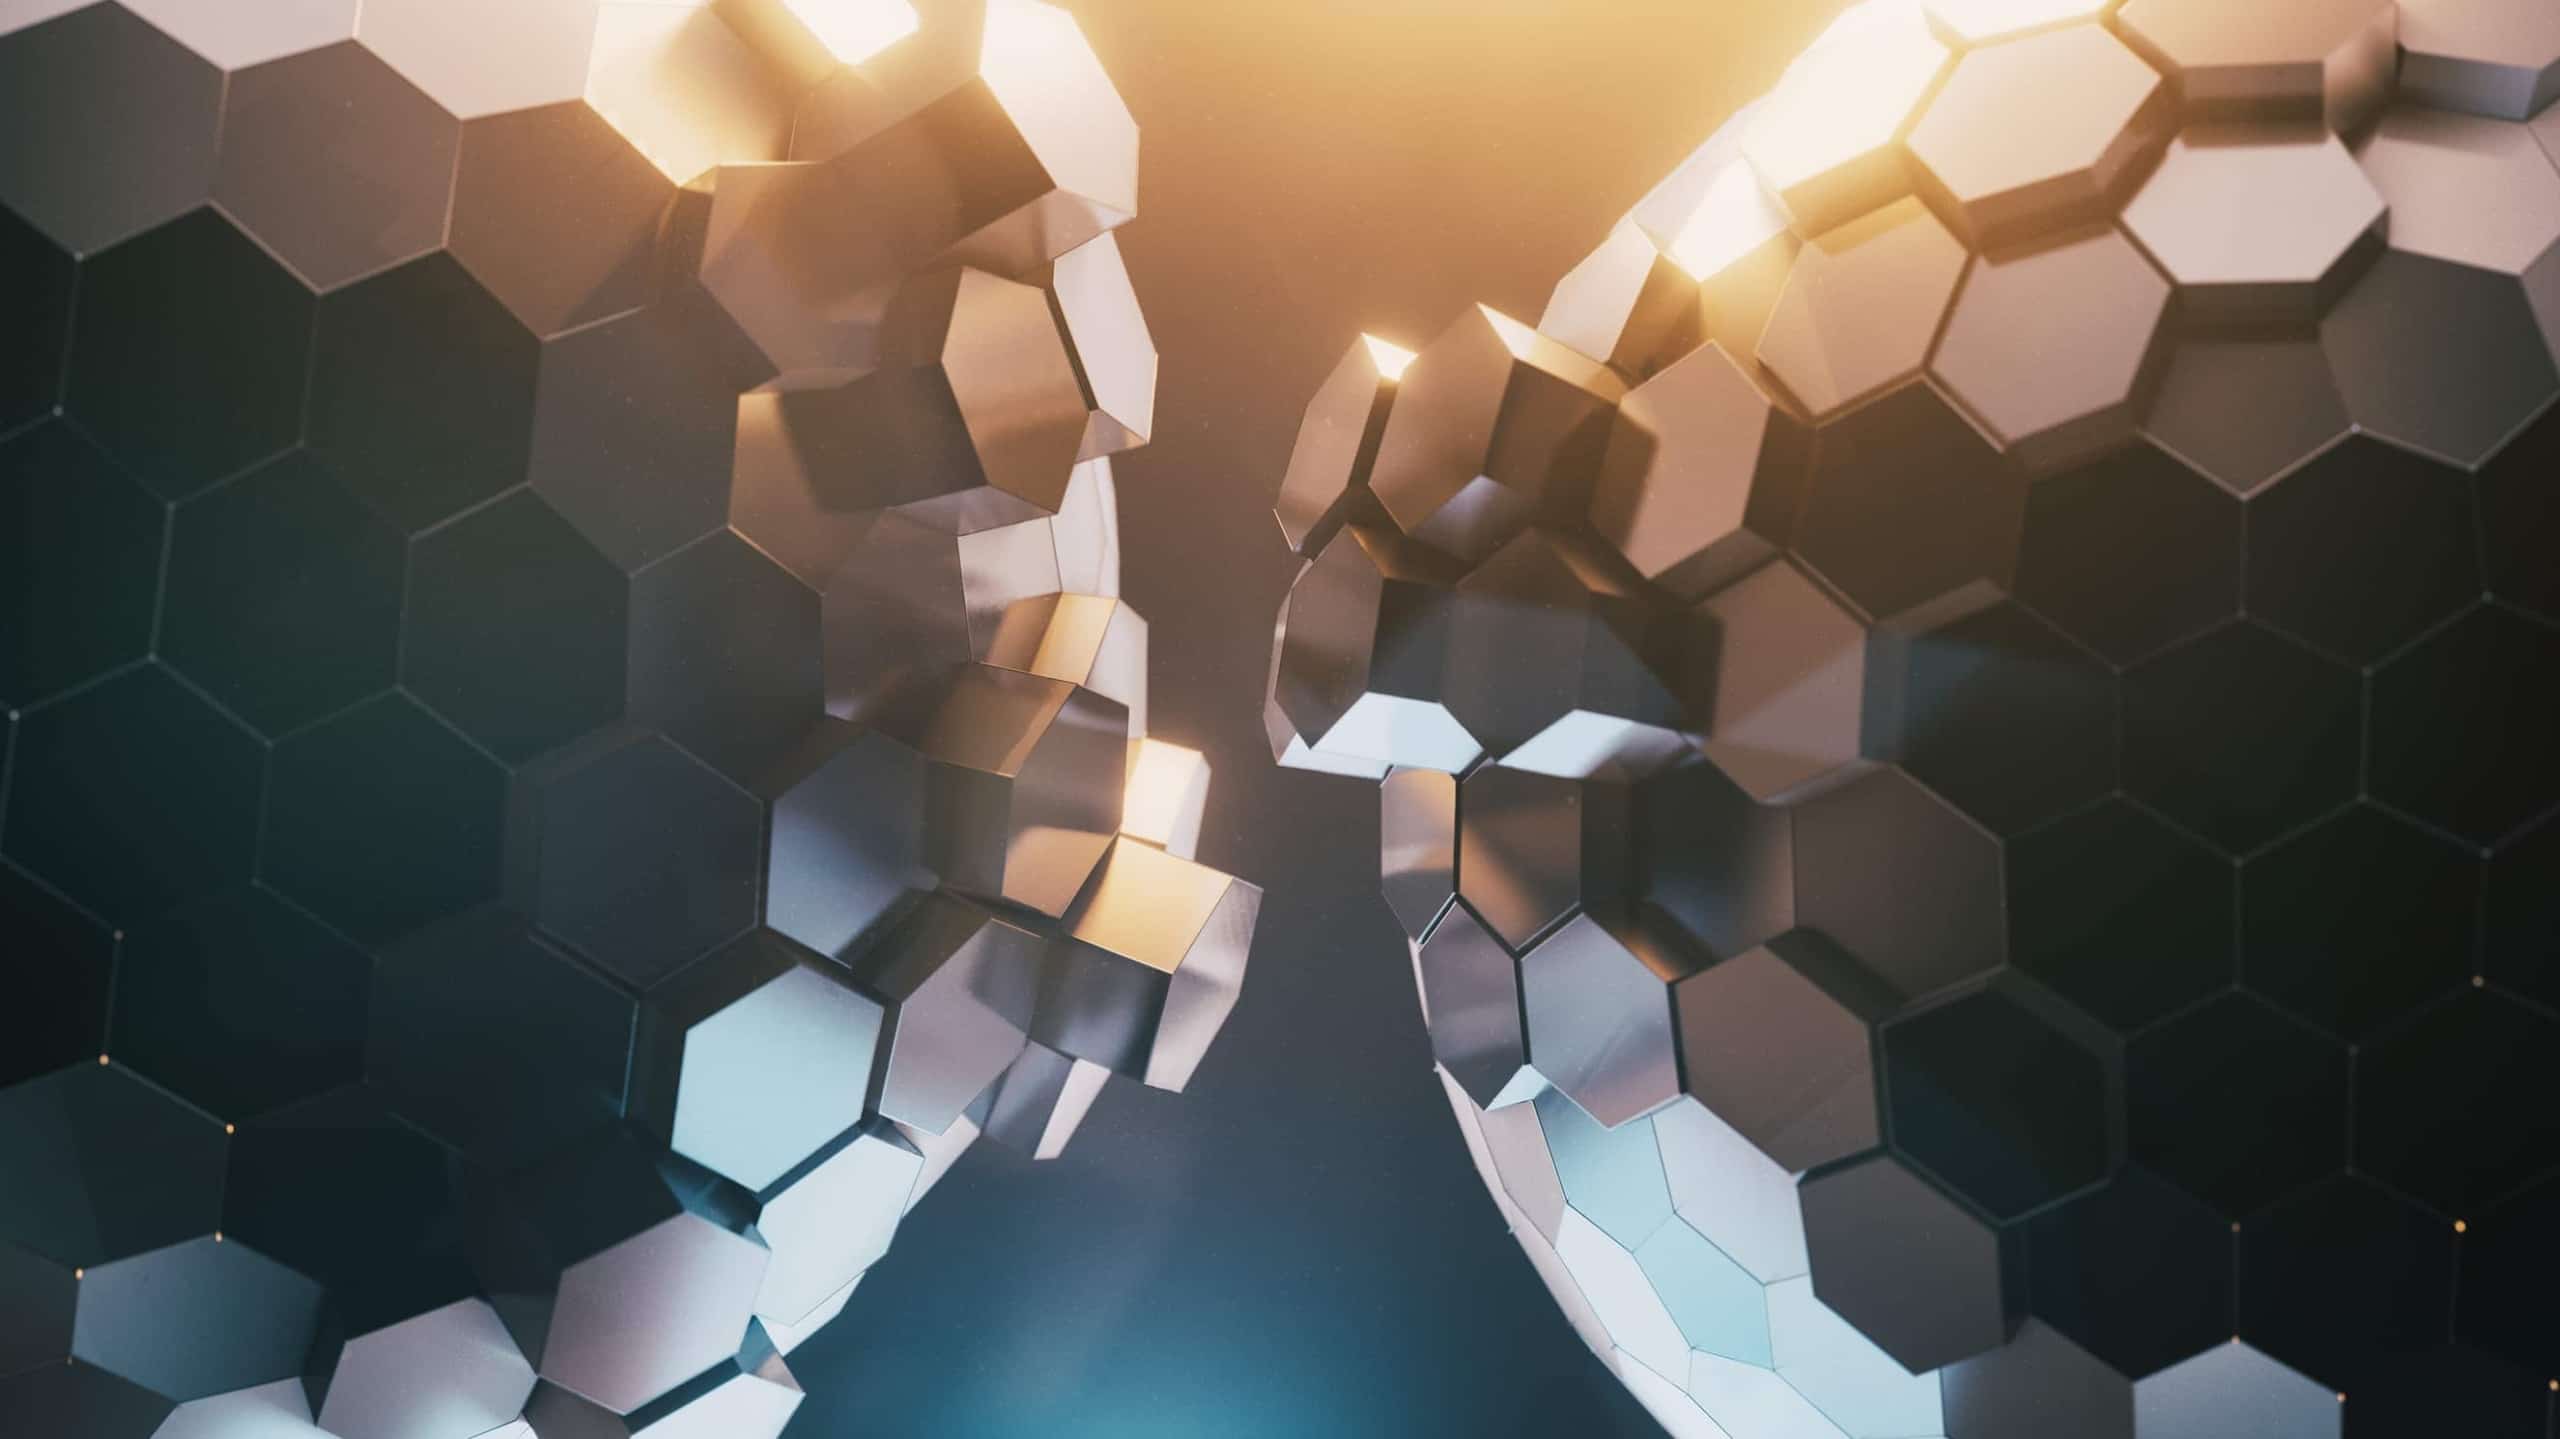 3d rendering of a futuristic hexagonal structure in dark tones with some segments disconnecting and glowing edges, creating a dynamic, abstract formation.